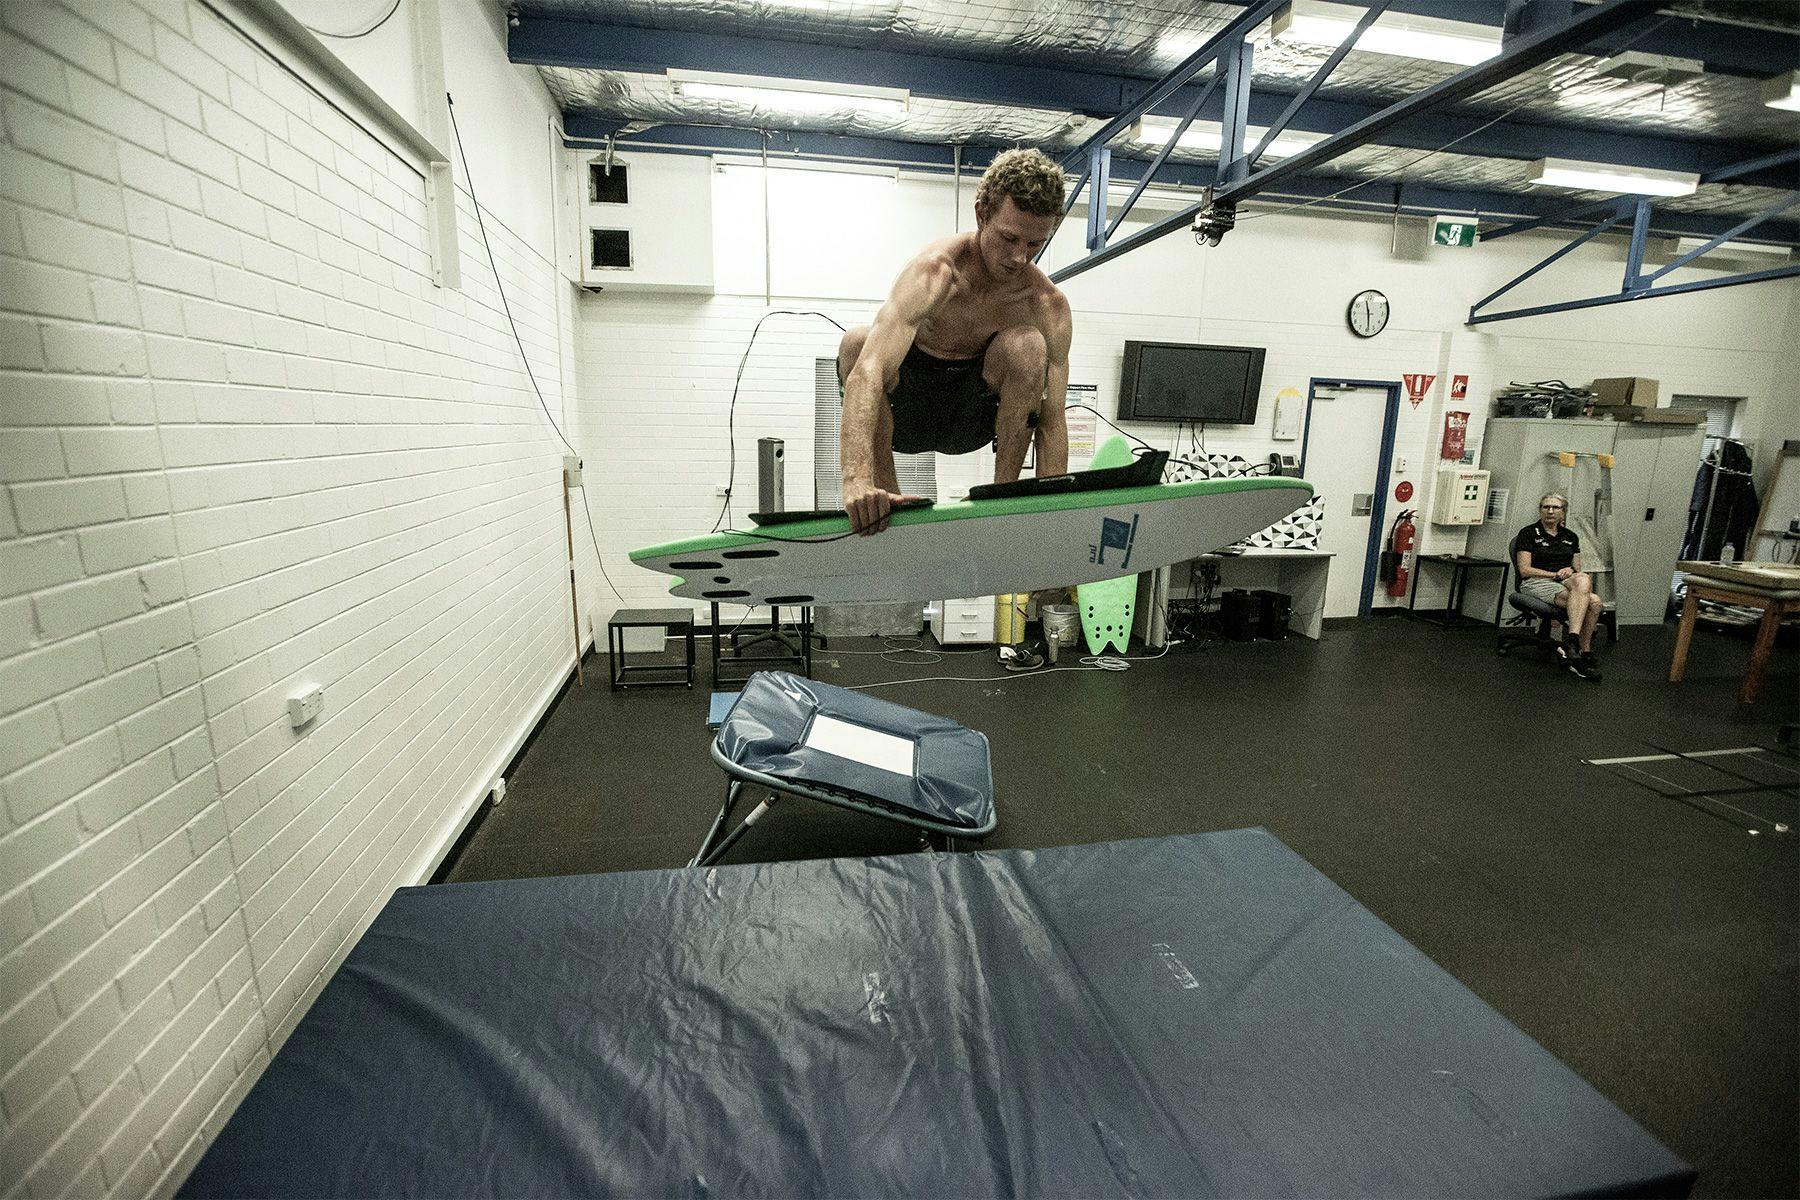 surfer in a sports science laboratory using a trampoline to replicate an aerial manoeuvre